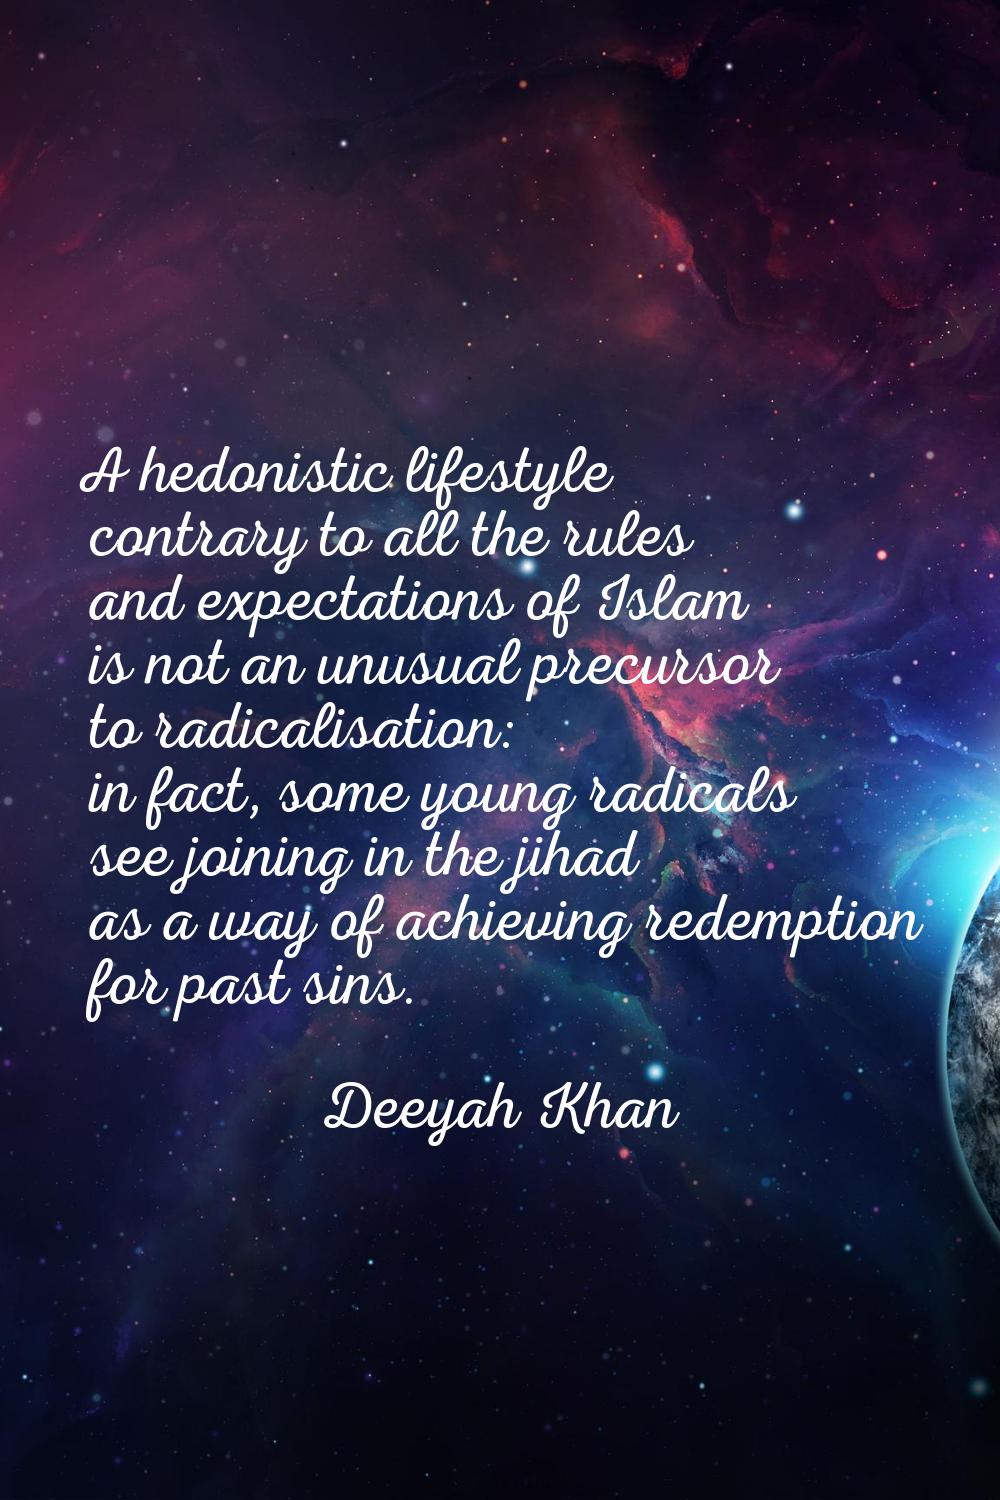 A hedonistic lifestyle contrary to all the rules and expectations of Islam is not an unusual precur